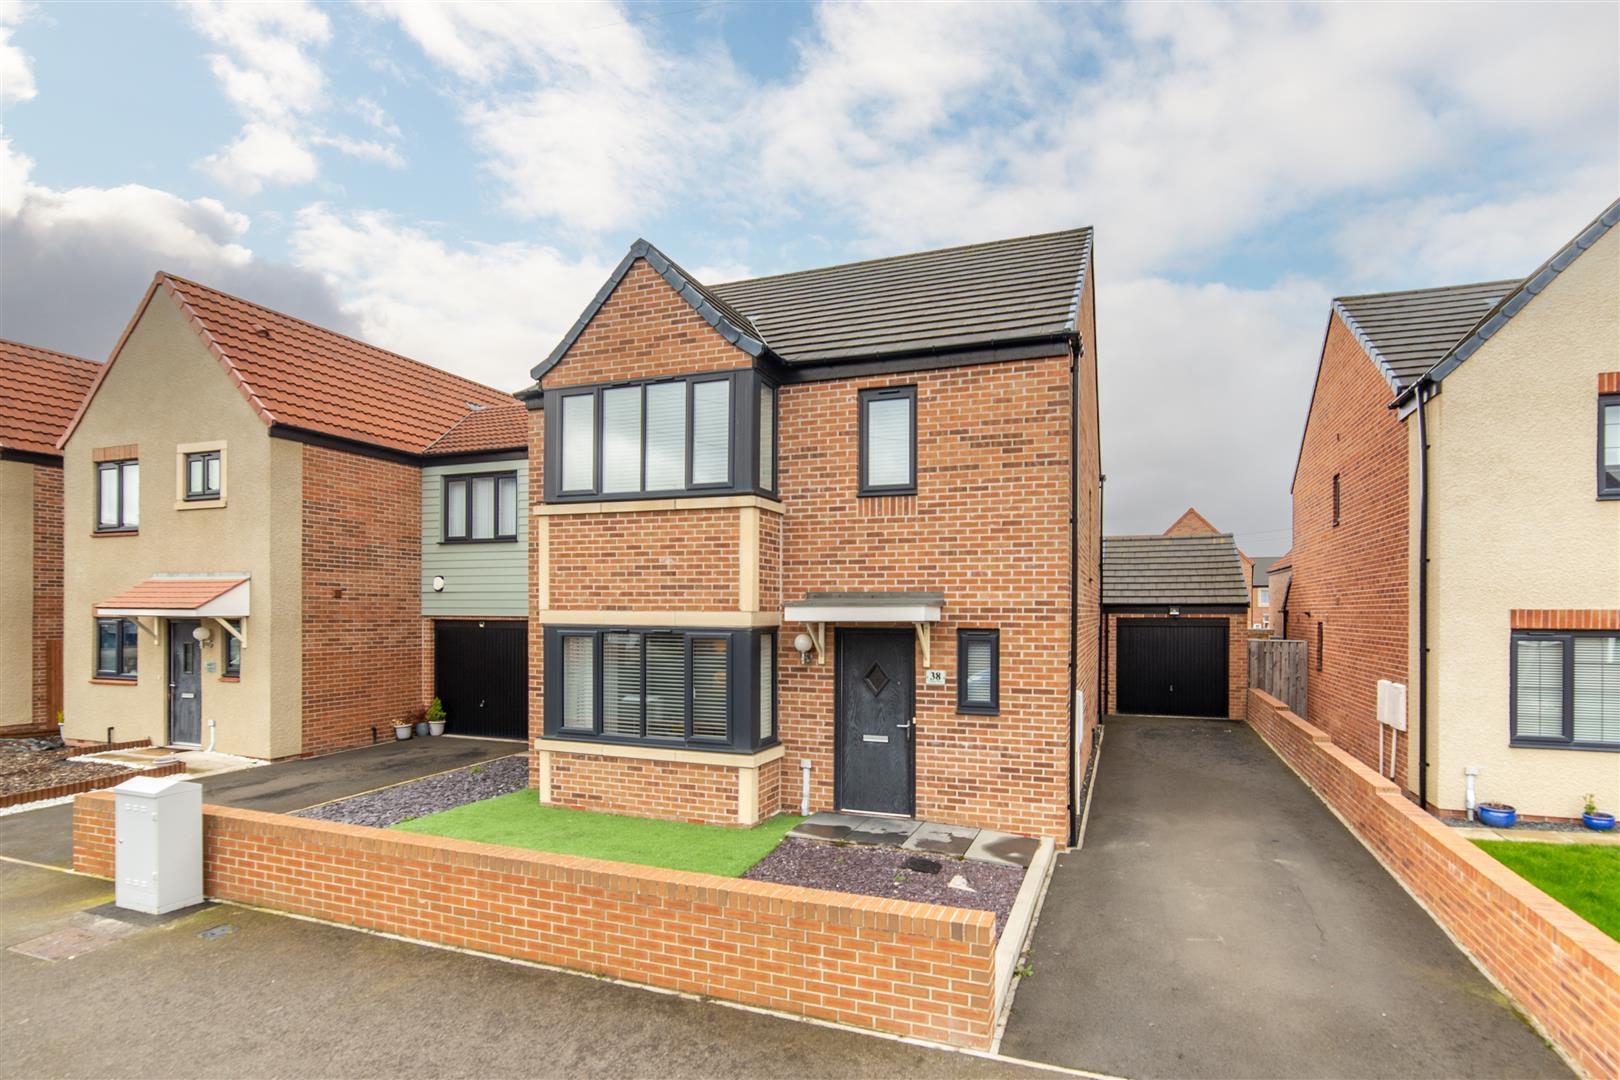 4 bed detached house for sale in Langley Place, Walkergate, NE6 